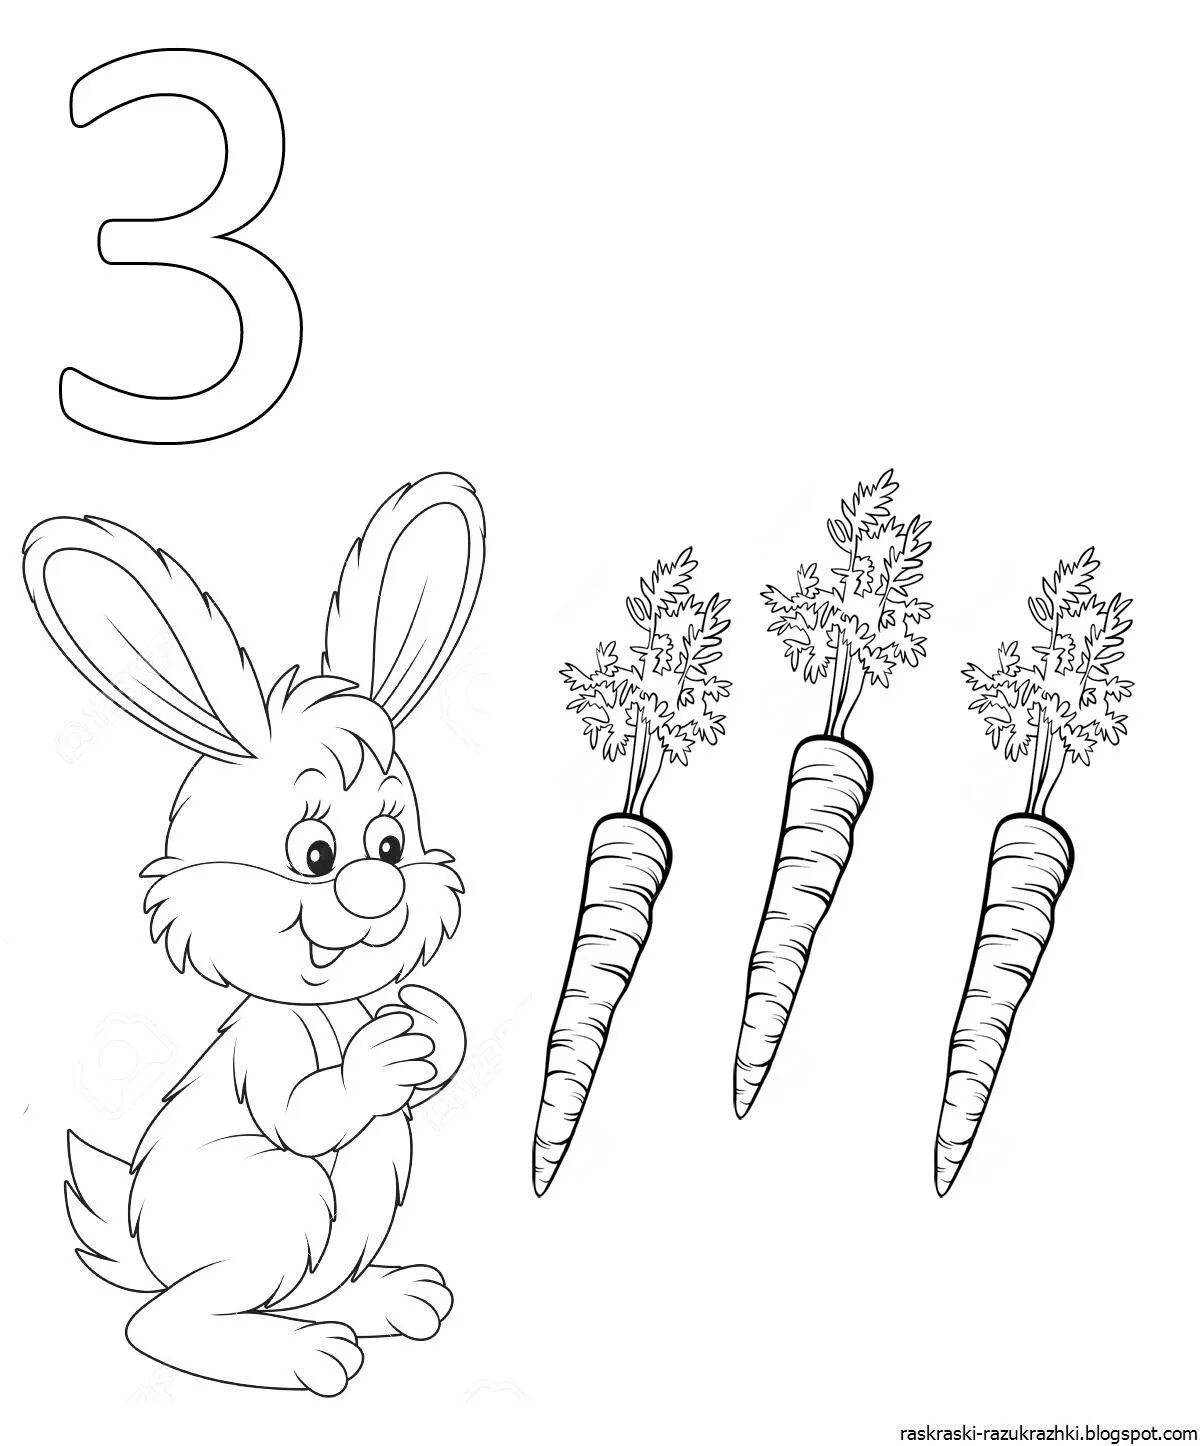 Color-fantastic count to 10 coloring page for preschoolers